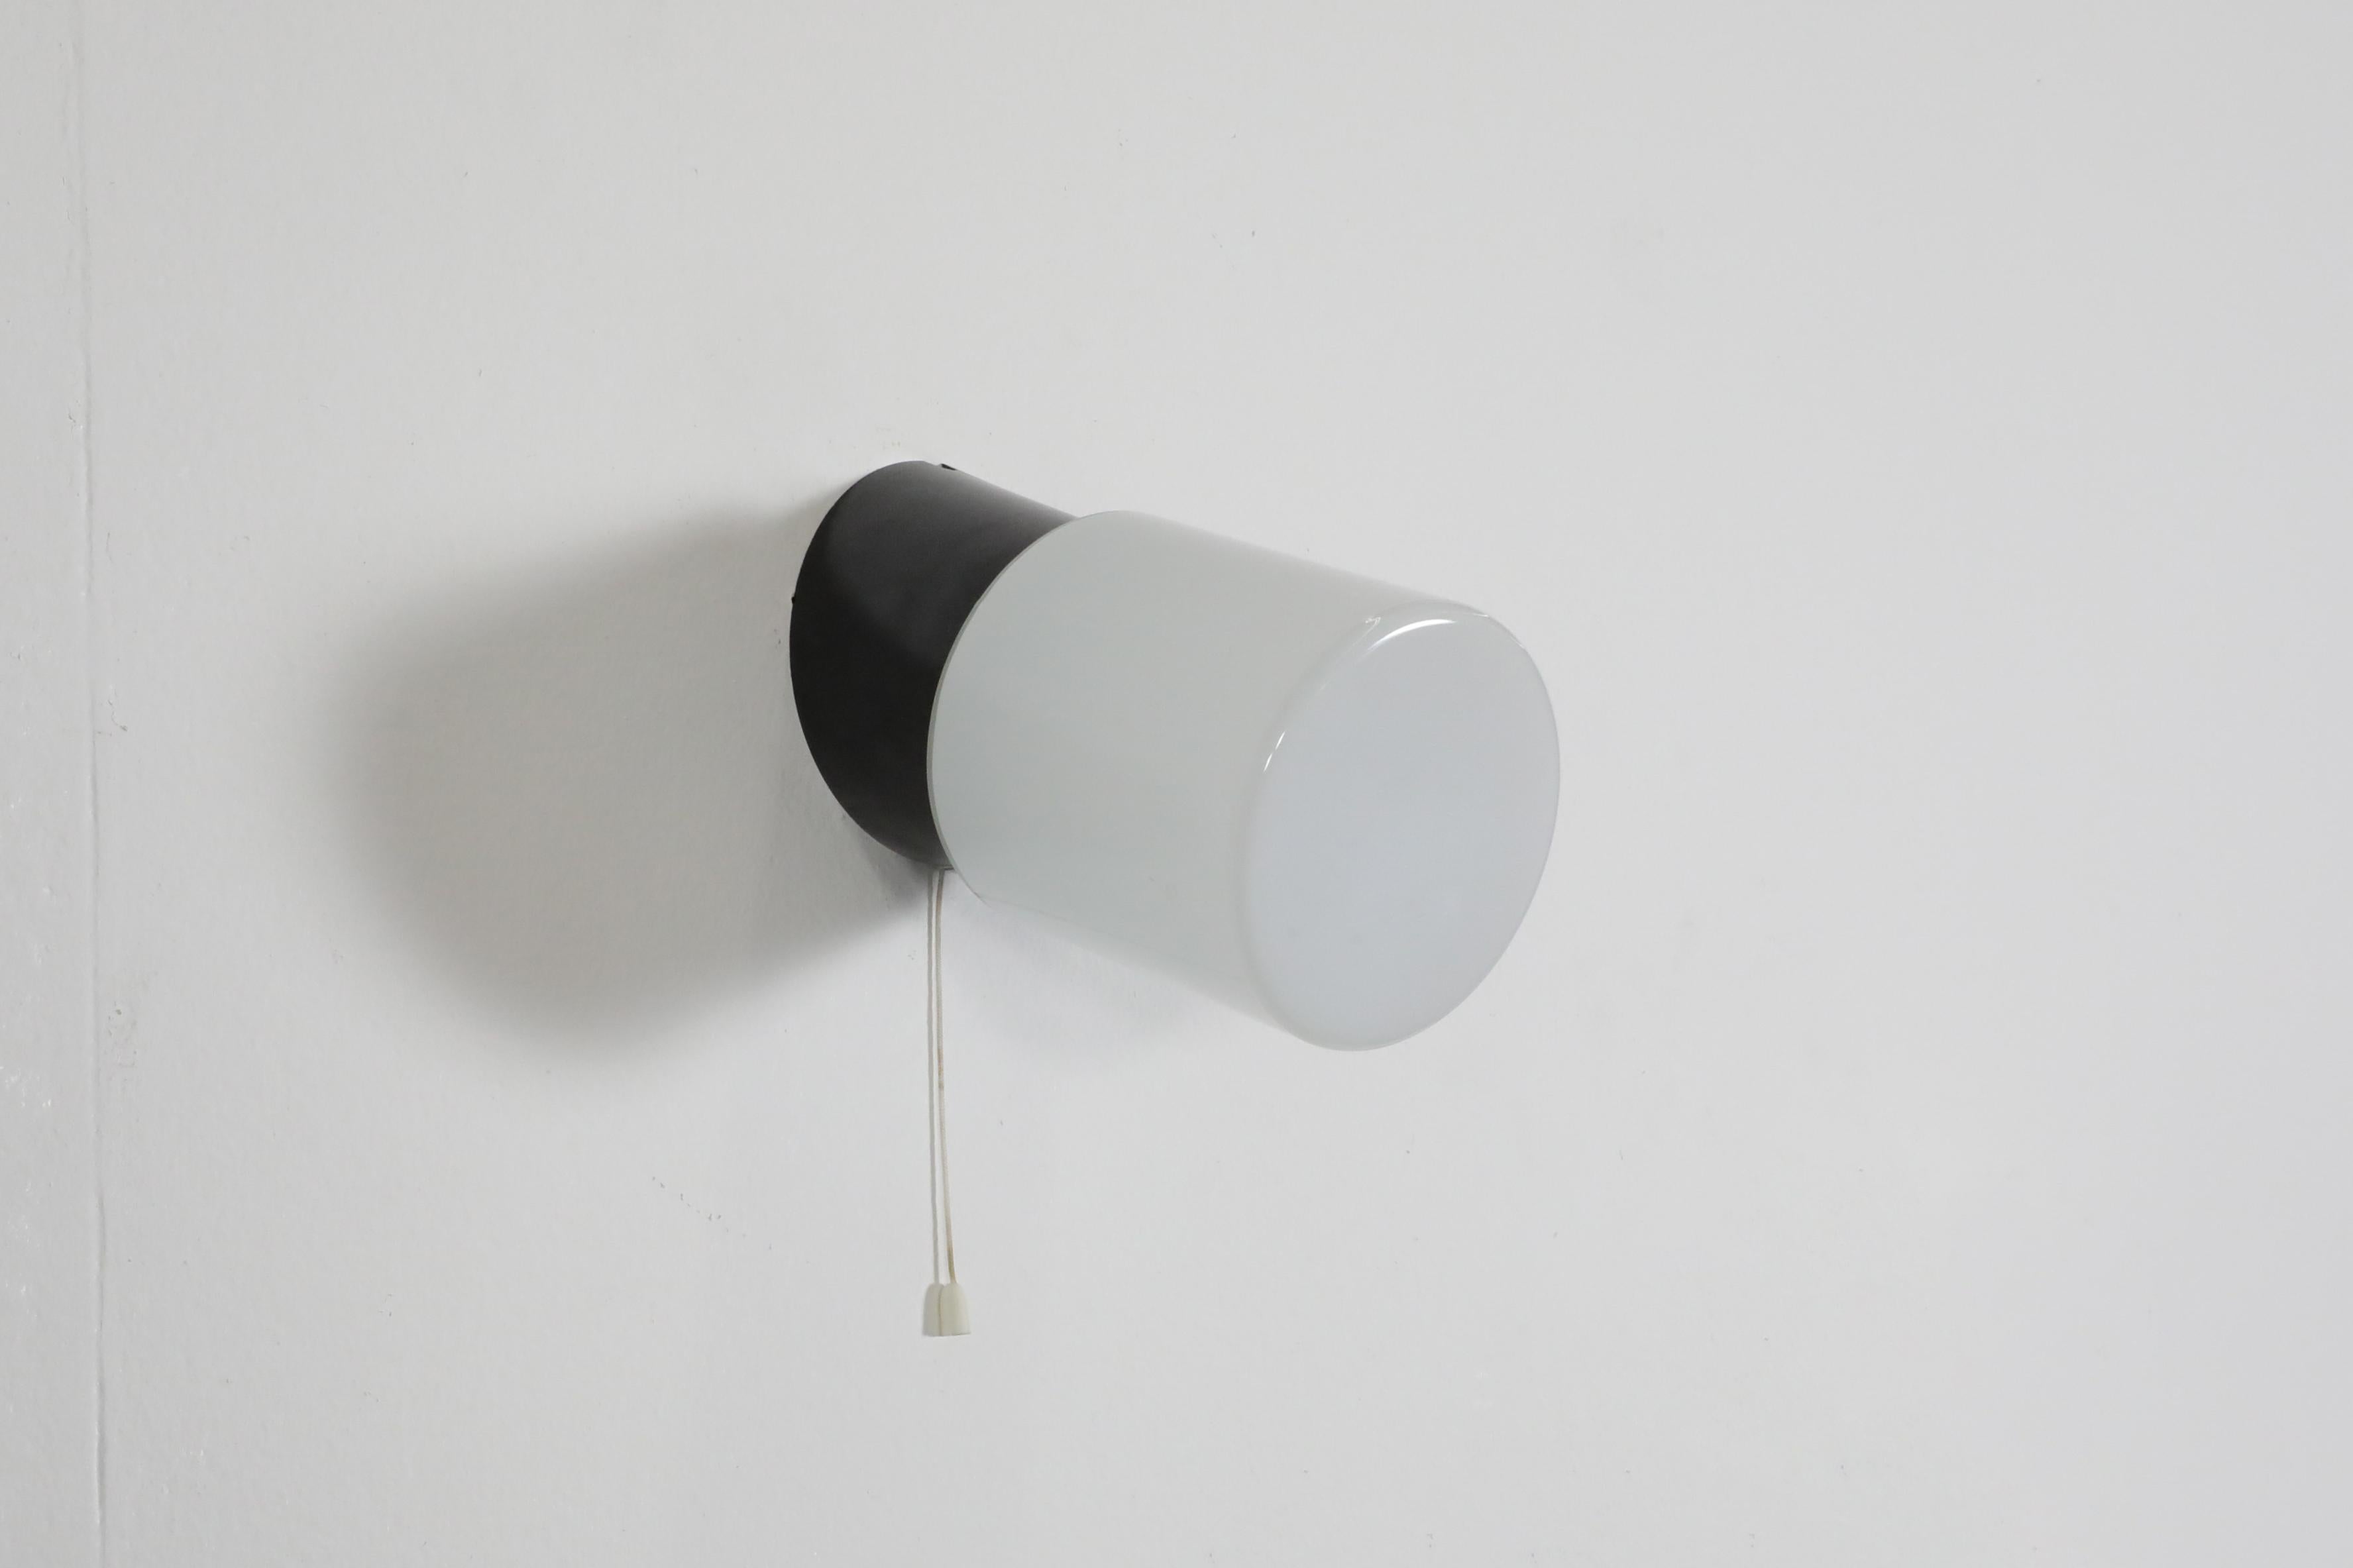 Black cylinder wall sconce with angled bakelite base, white glass shade and pull string switch. This lamp is for hard wire installation, but a cord can be added, as there is a notch in the base. In original condition with visible wear consistent